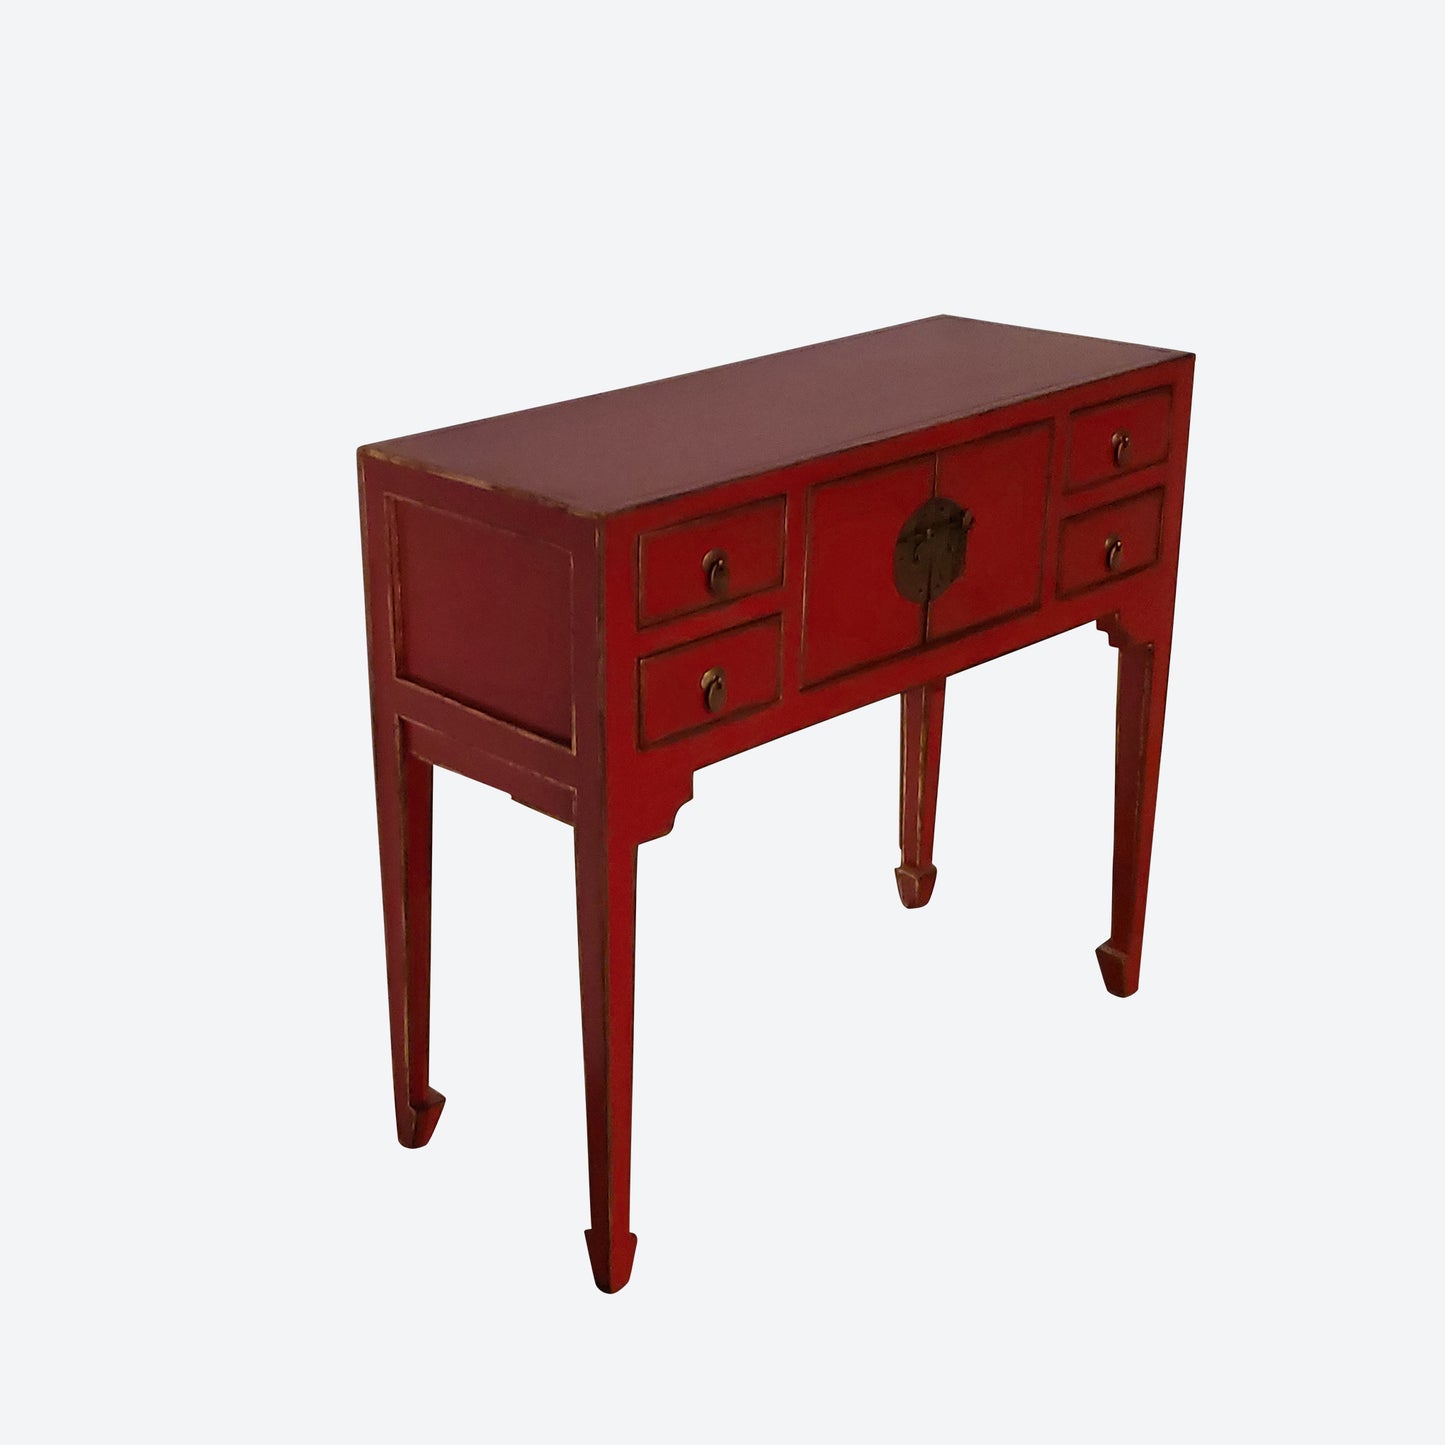 Red Center Console Table With Gold Accents And Key Hardware -SK- SKU 1139